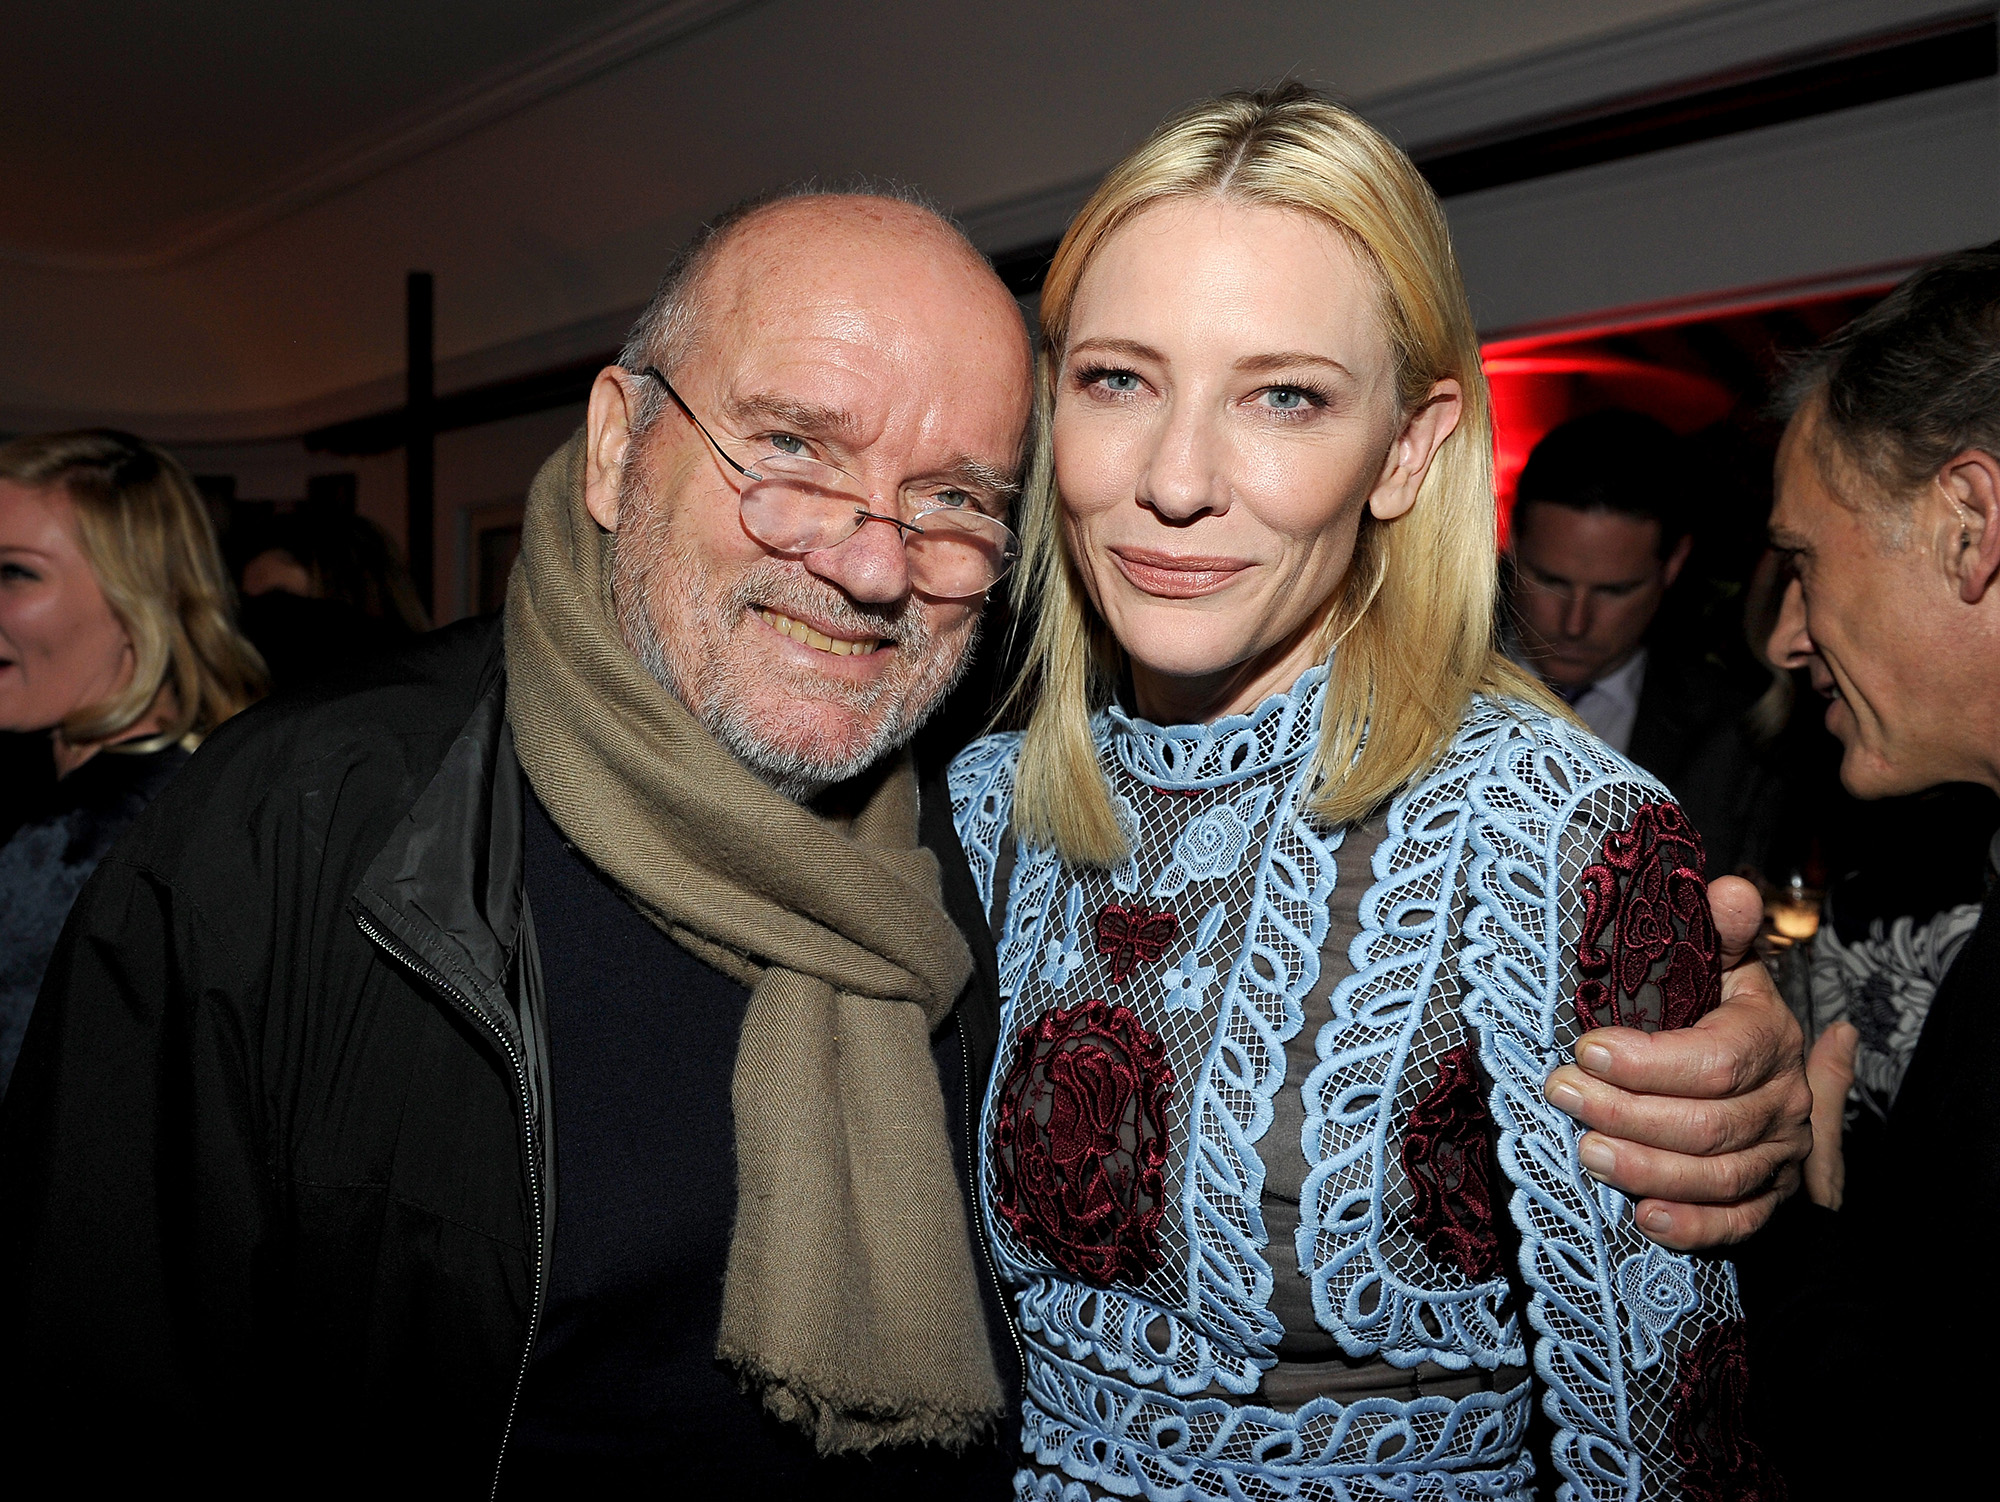 Peter Lindbergh and Cate Blanchett, on Jan. 7, 2016 in Los Angeles.